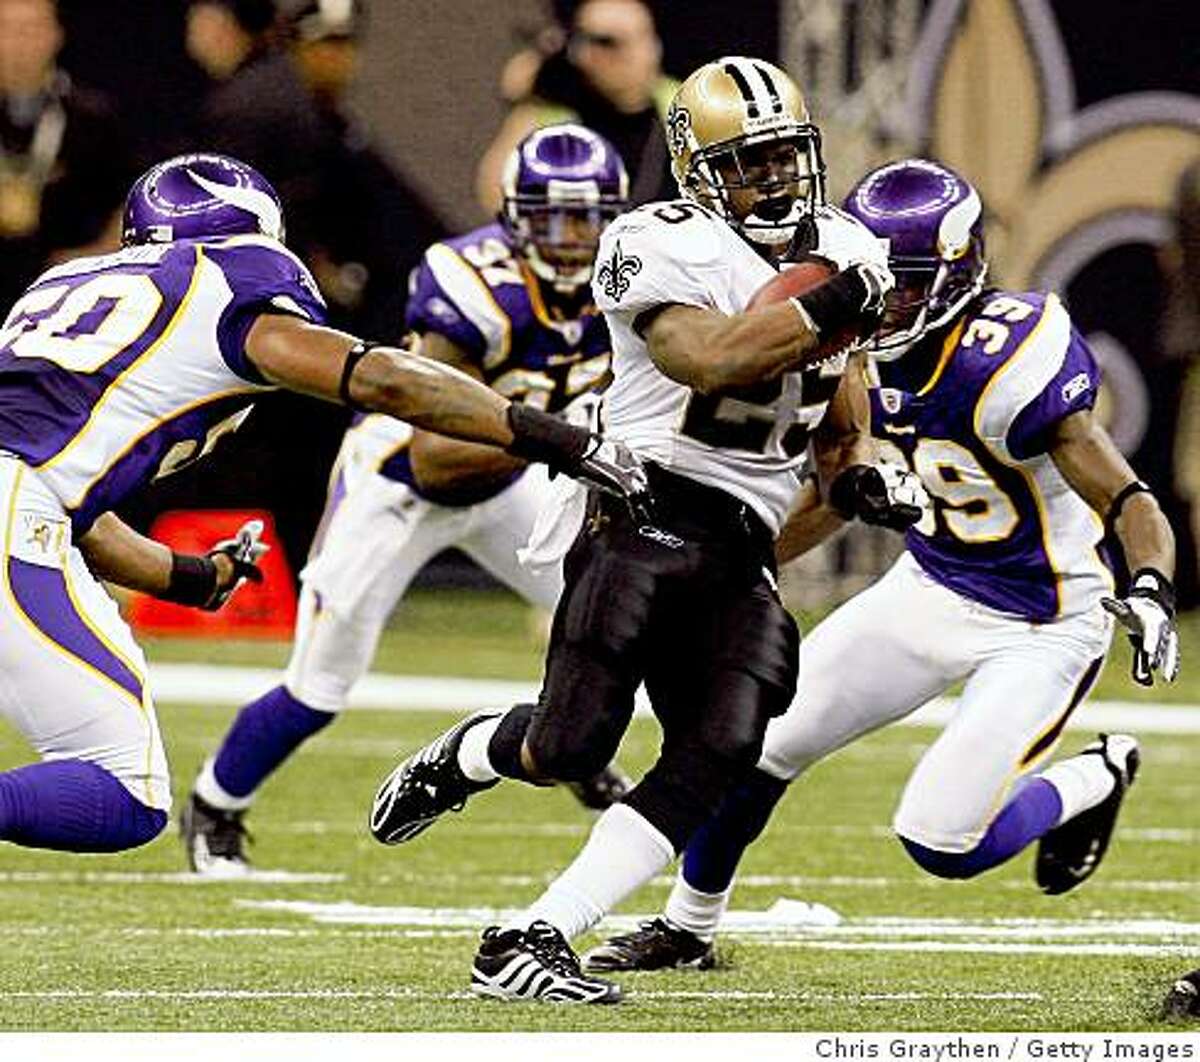 NEW ORLEANS - OCTOBER 06: Reggie Bush #25 of the New Orleans Saints gets past Erin Henderson #50 of the Minnesota Vikings on October 6, 2008 at the Superdome in New Orleans, Louisiana. Bush tied an NFL record by returning two punts for touchdowns in a game. The Vikings defeated the Saints 30-27. (Photo by Chris Graythen/Getty Images)